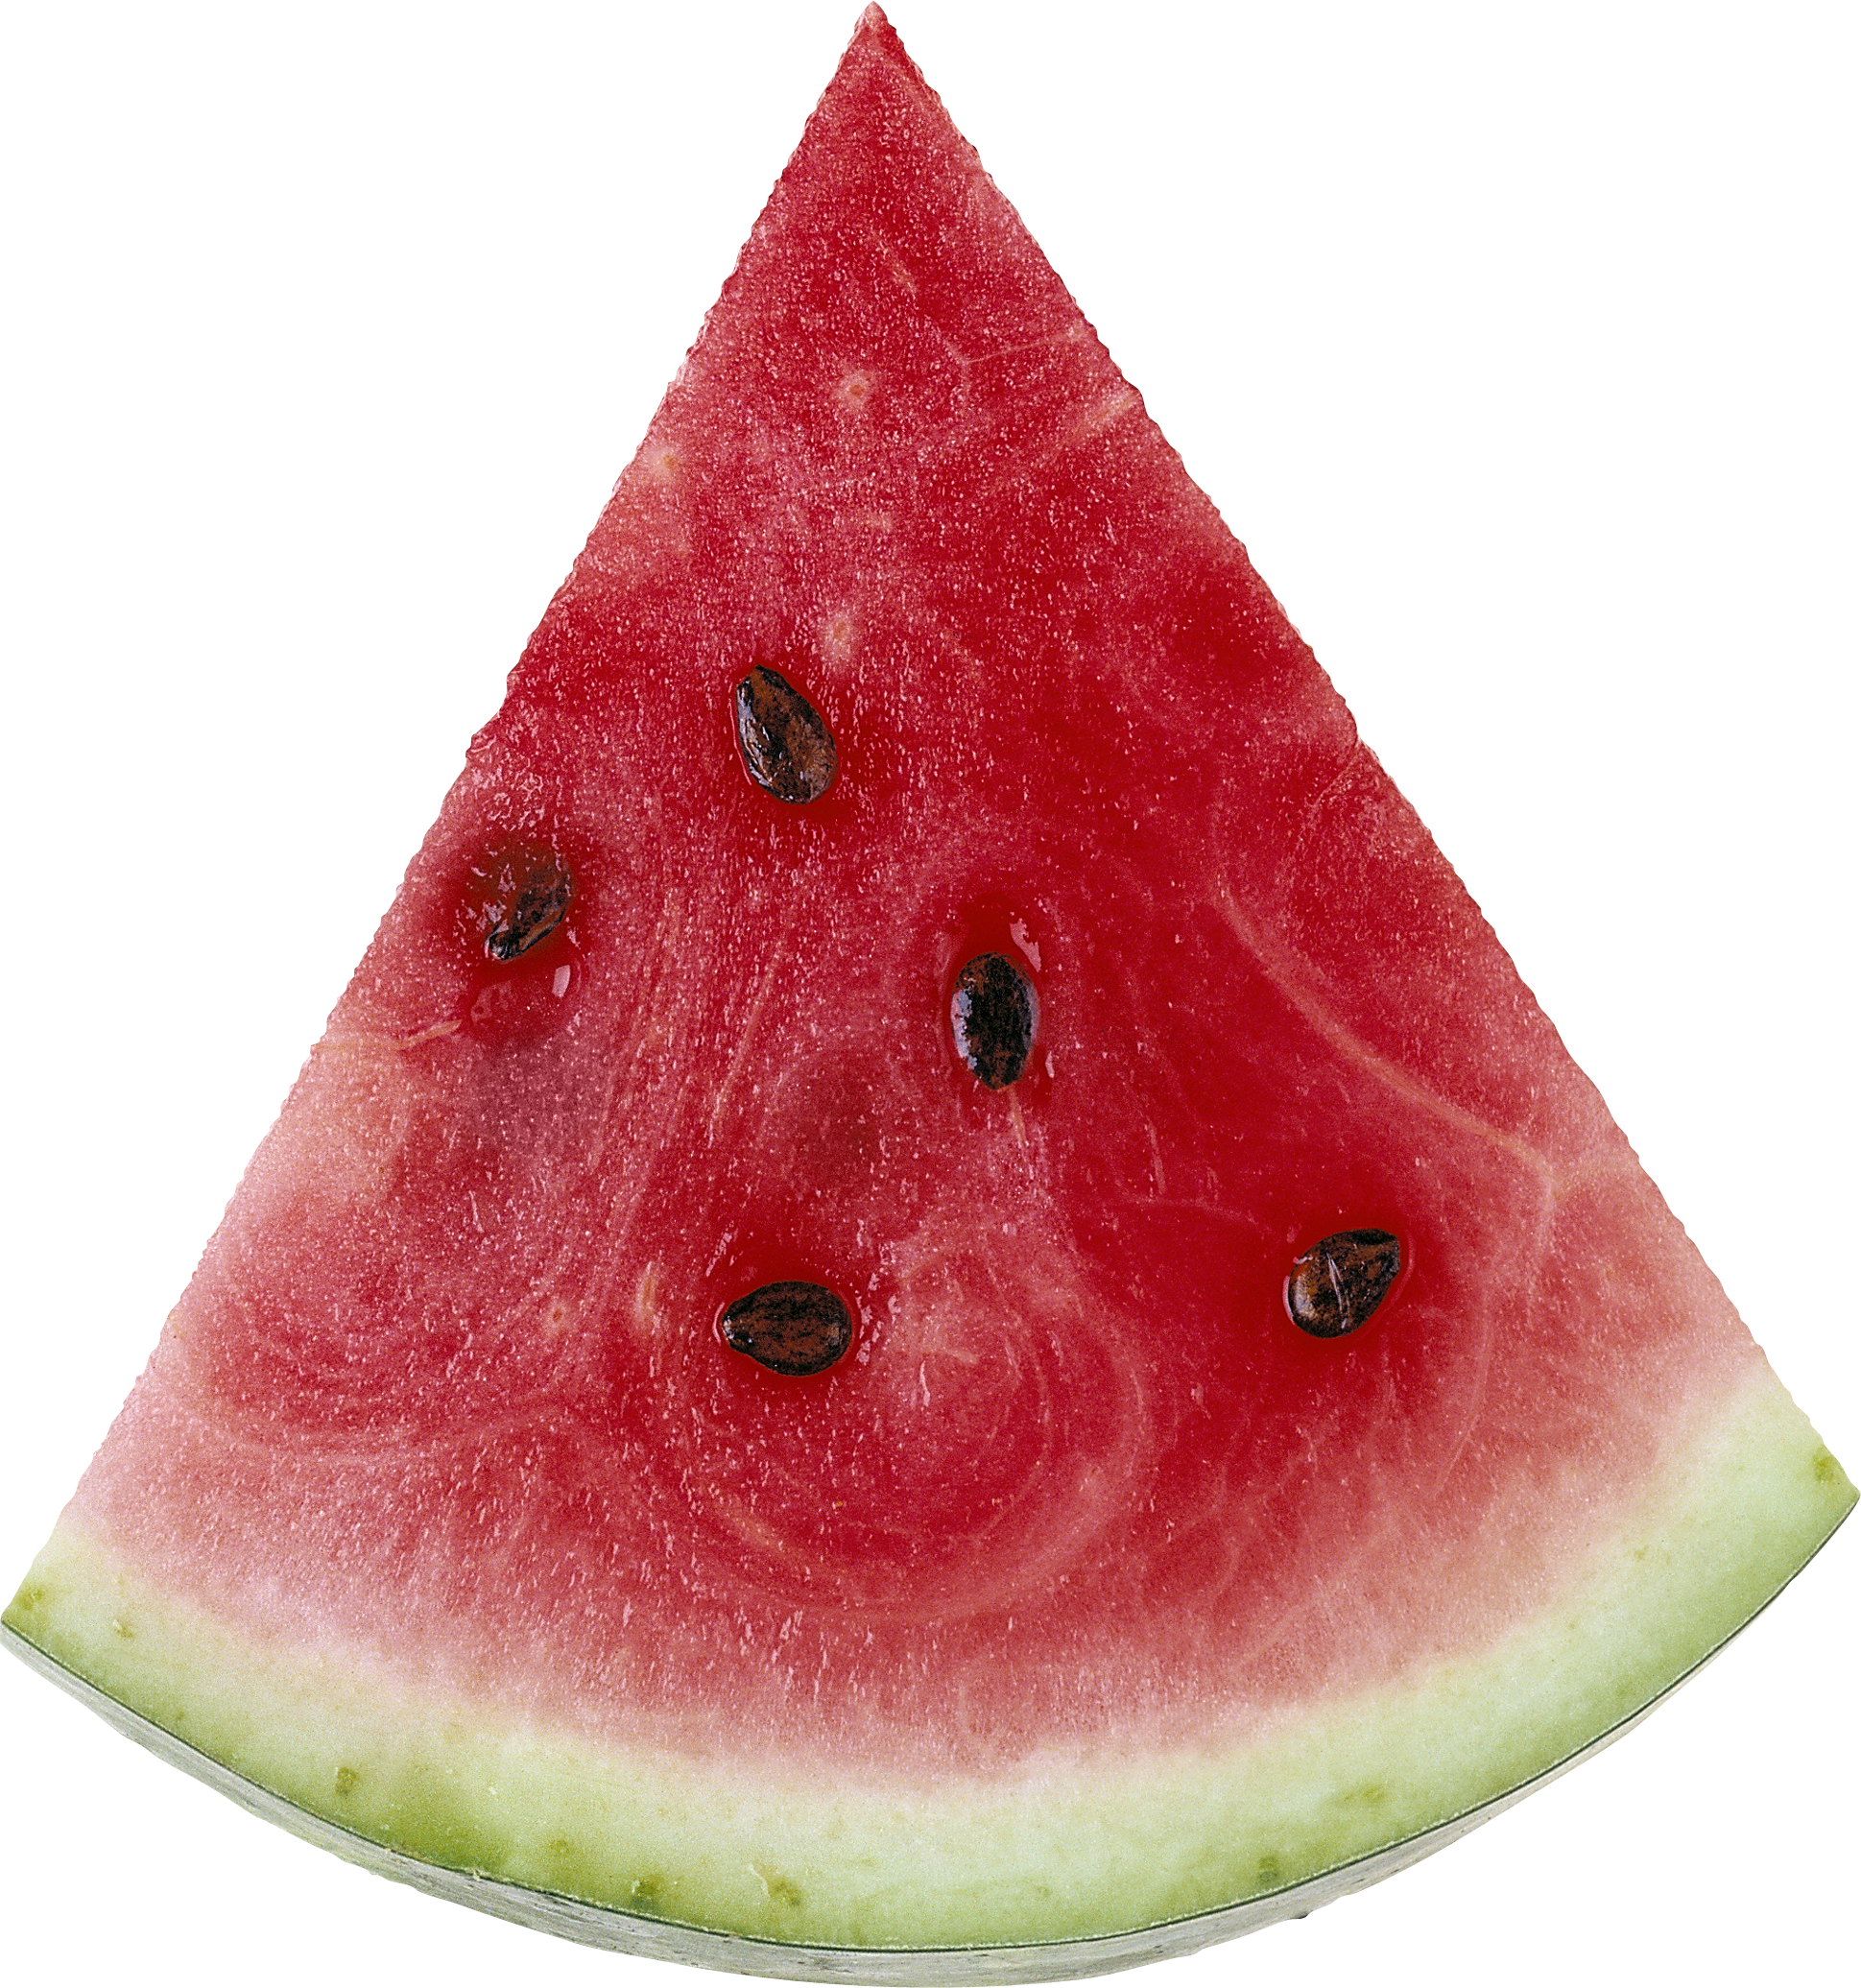 Watermelon clipart watermelon rind. Eight isolated stock photo